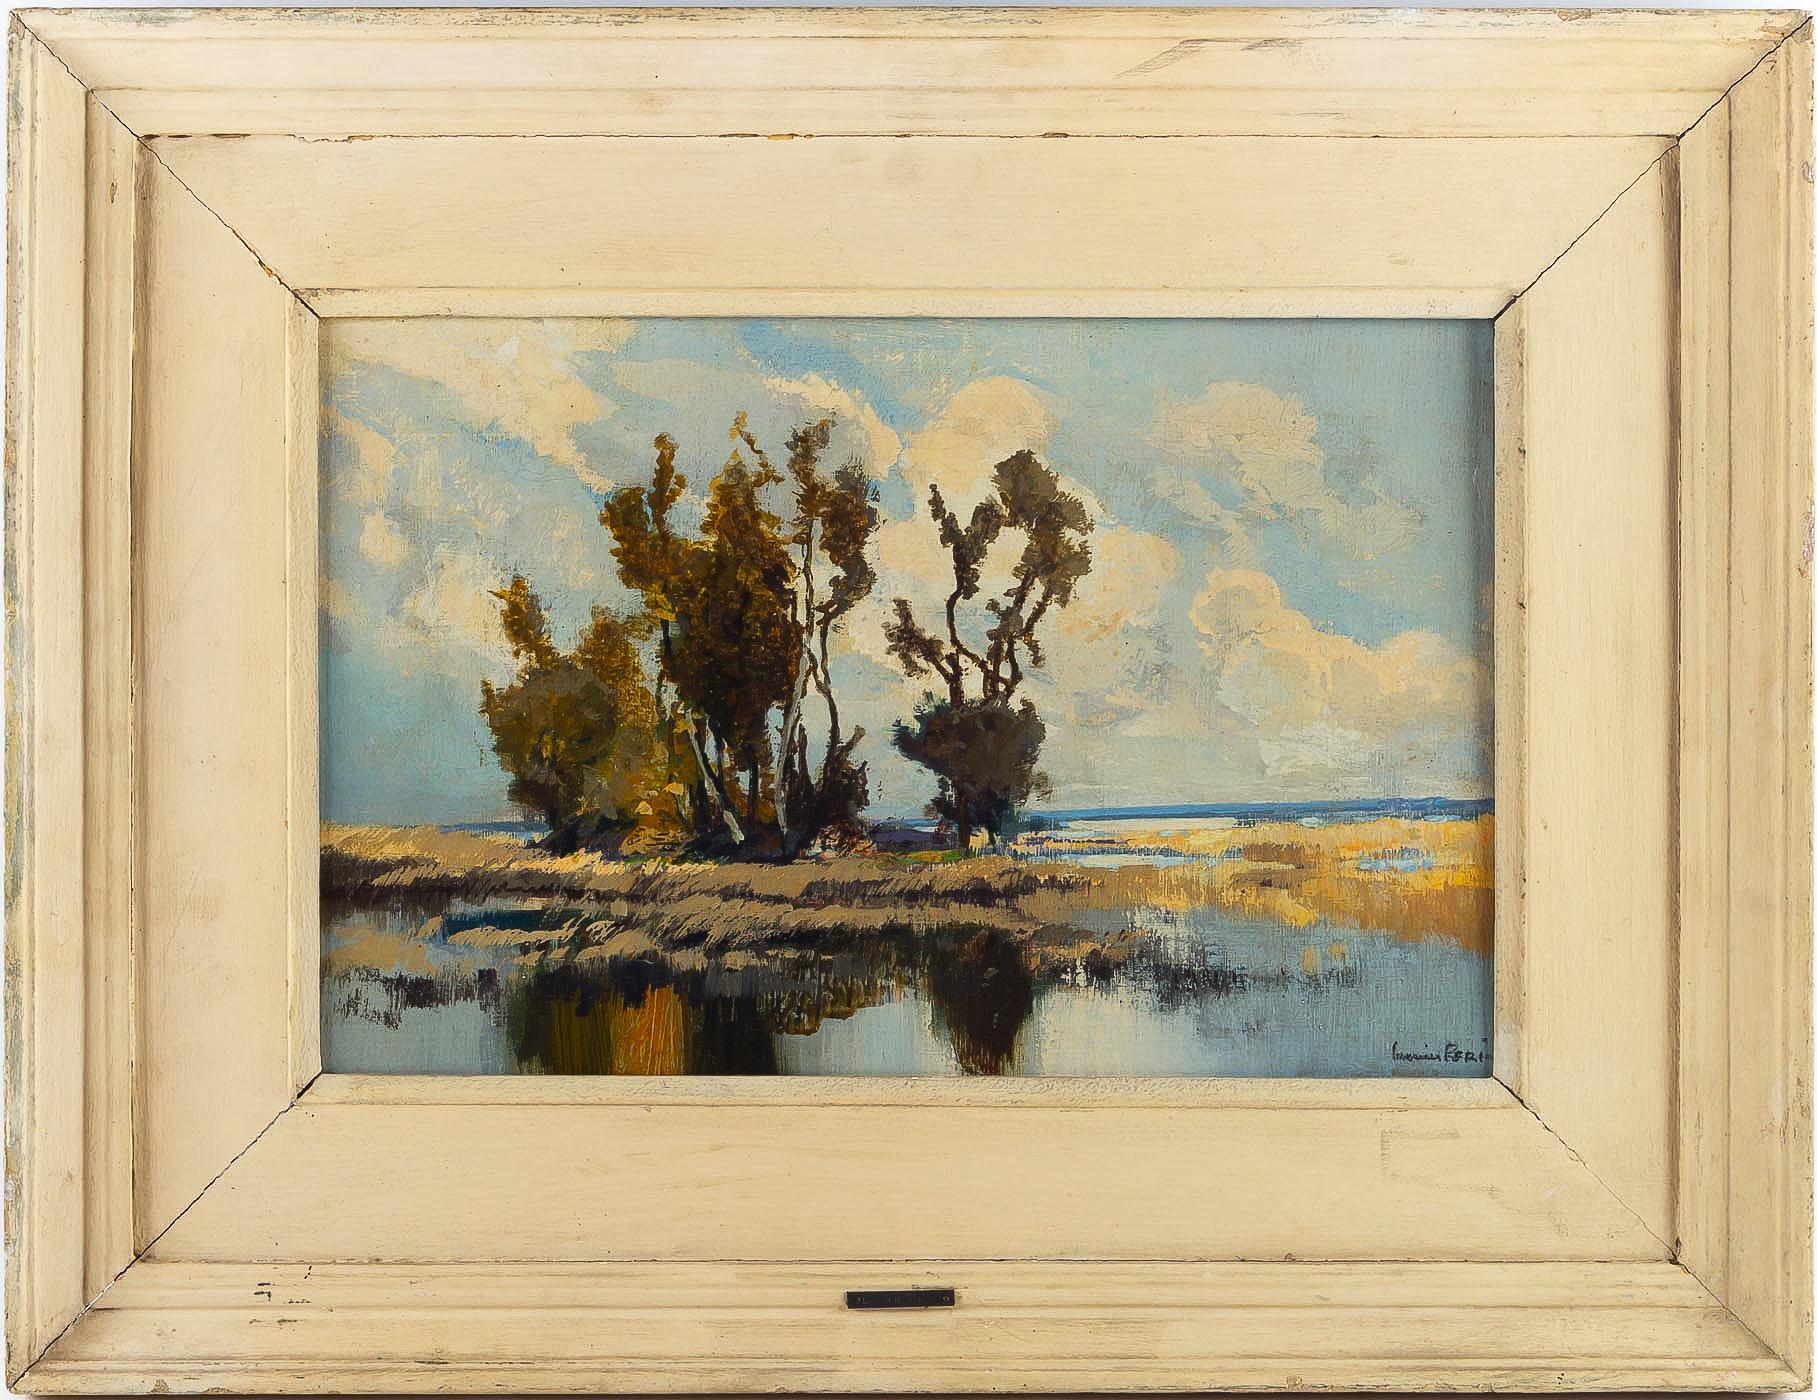 Lucien Péri, oil on panel, Le Liamone Corsican View, circa 1925-1935

It is rare to be able to find on the Market Art paintings of this well-known Corsica painter, of the Ajaccio School.
We are pleased to share with you this beautiful painting of